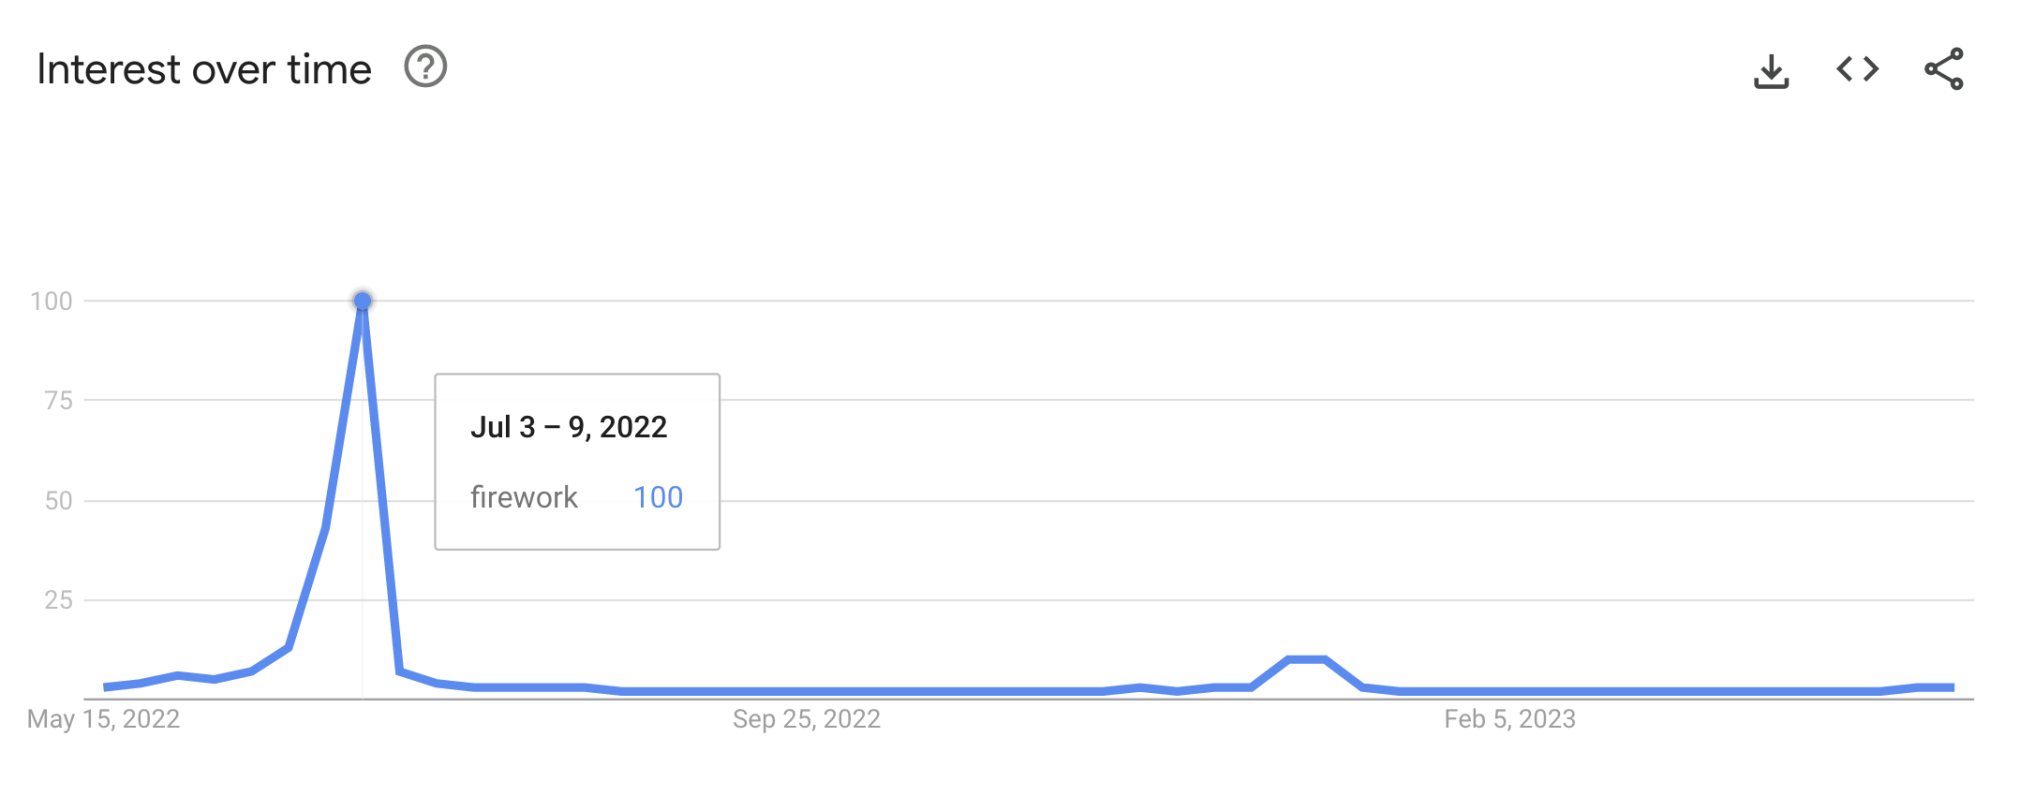 google trends for search term firework showing peak interest around July 4th